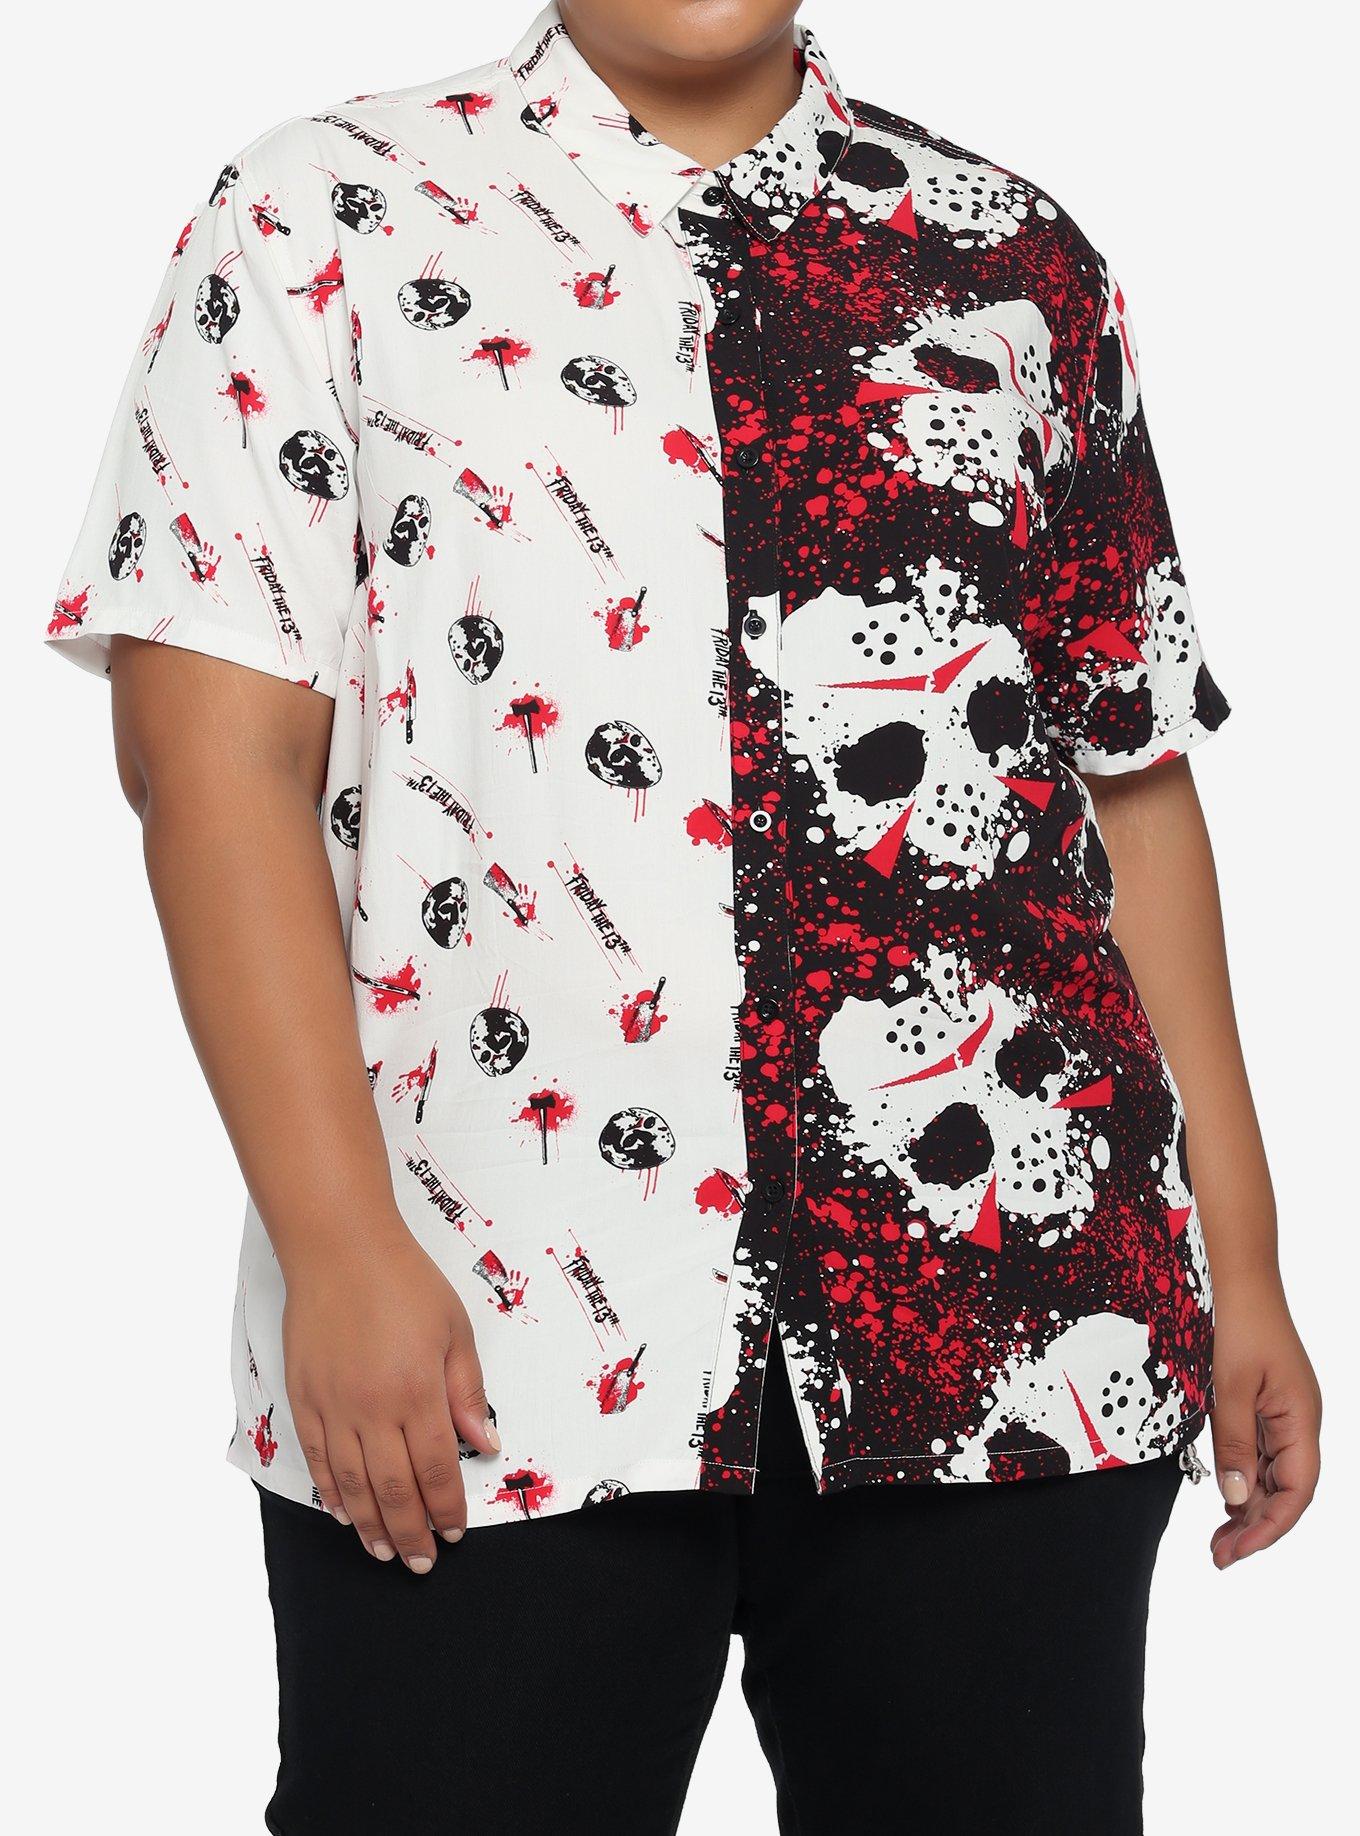 Friday The 13th Split Oversized Girls Woven Button-Up Plus Size, MULTI, hi-res